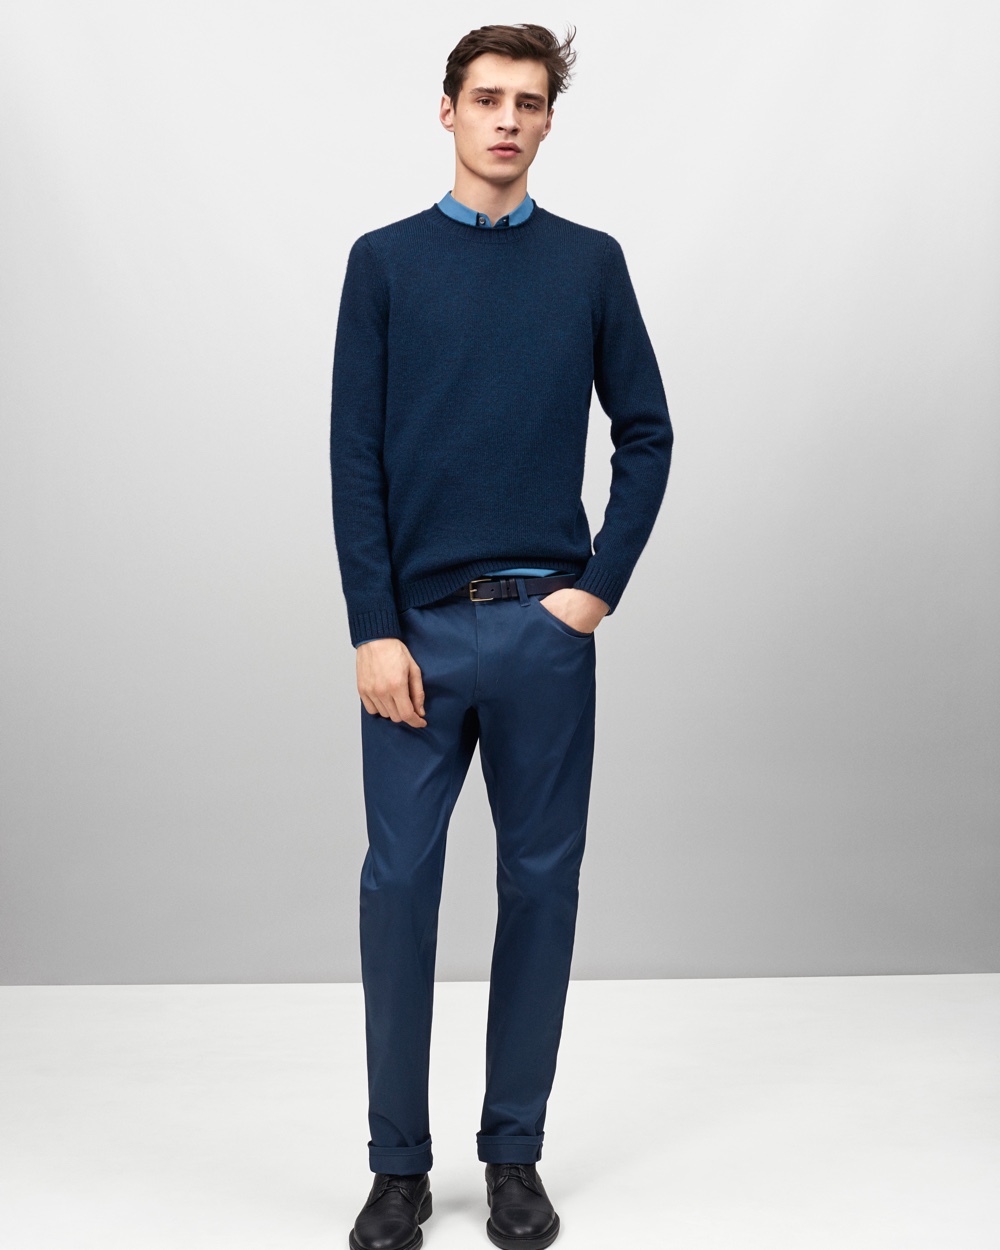 Adrien Sahores Models Theory’s Fall/Winter 2015 Collection of Men’s ...